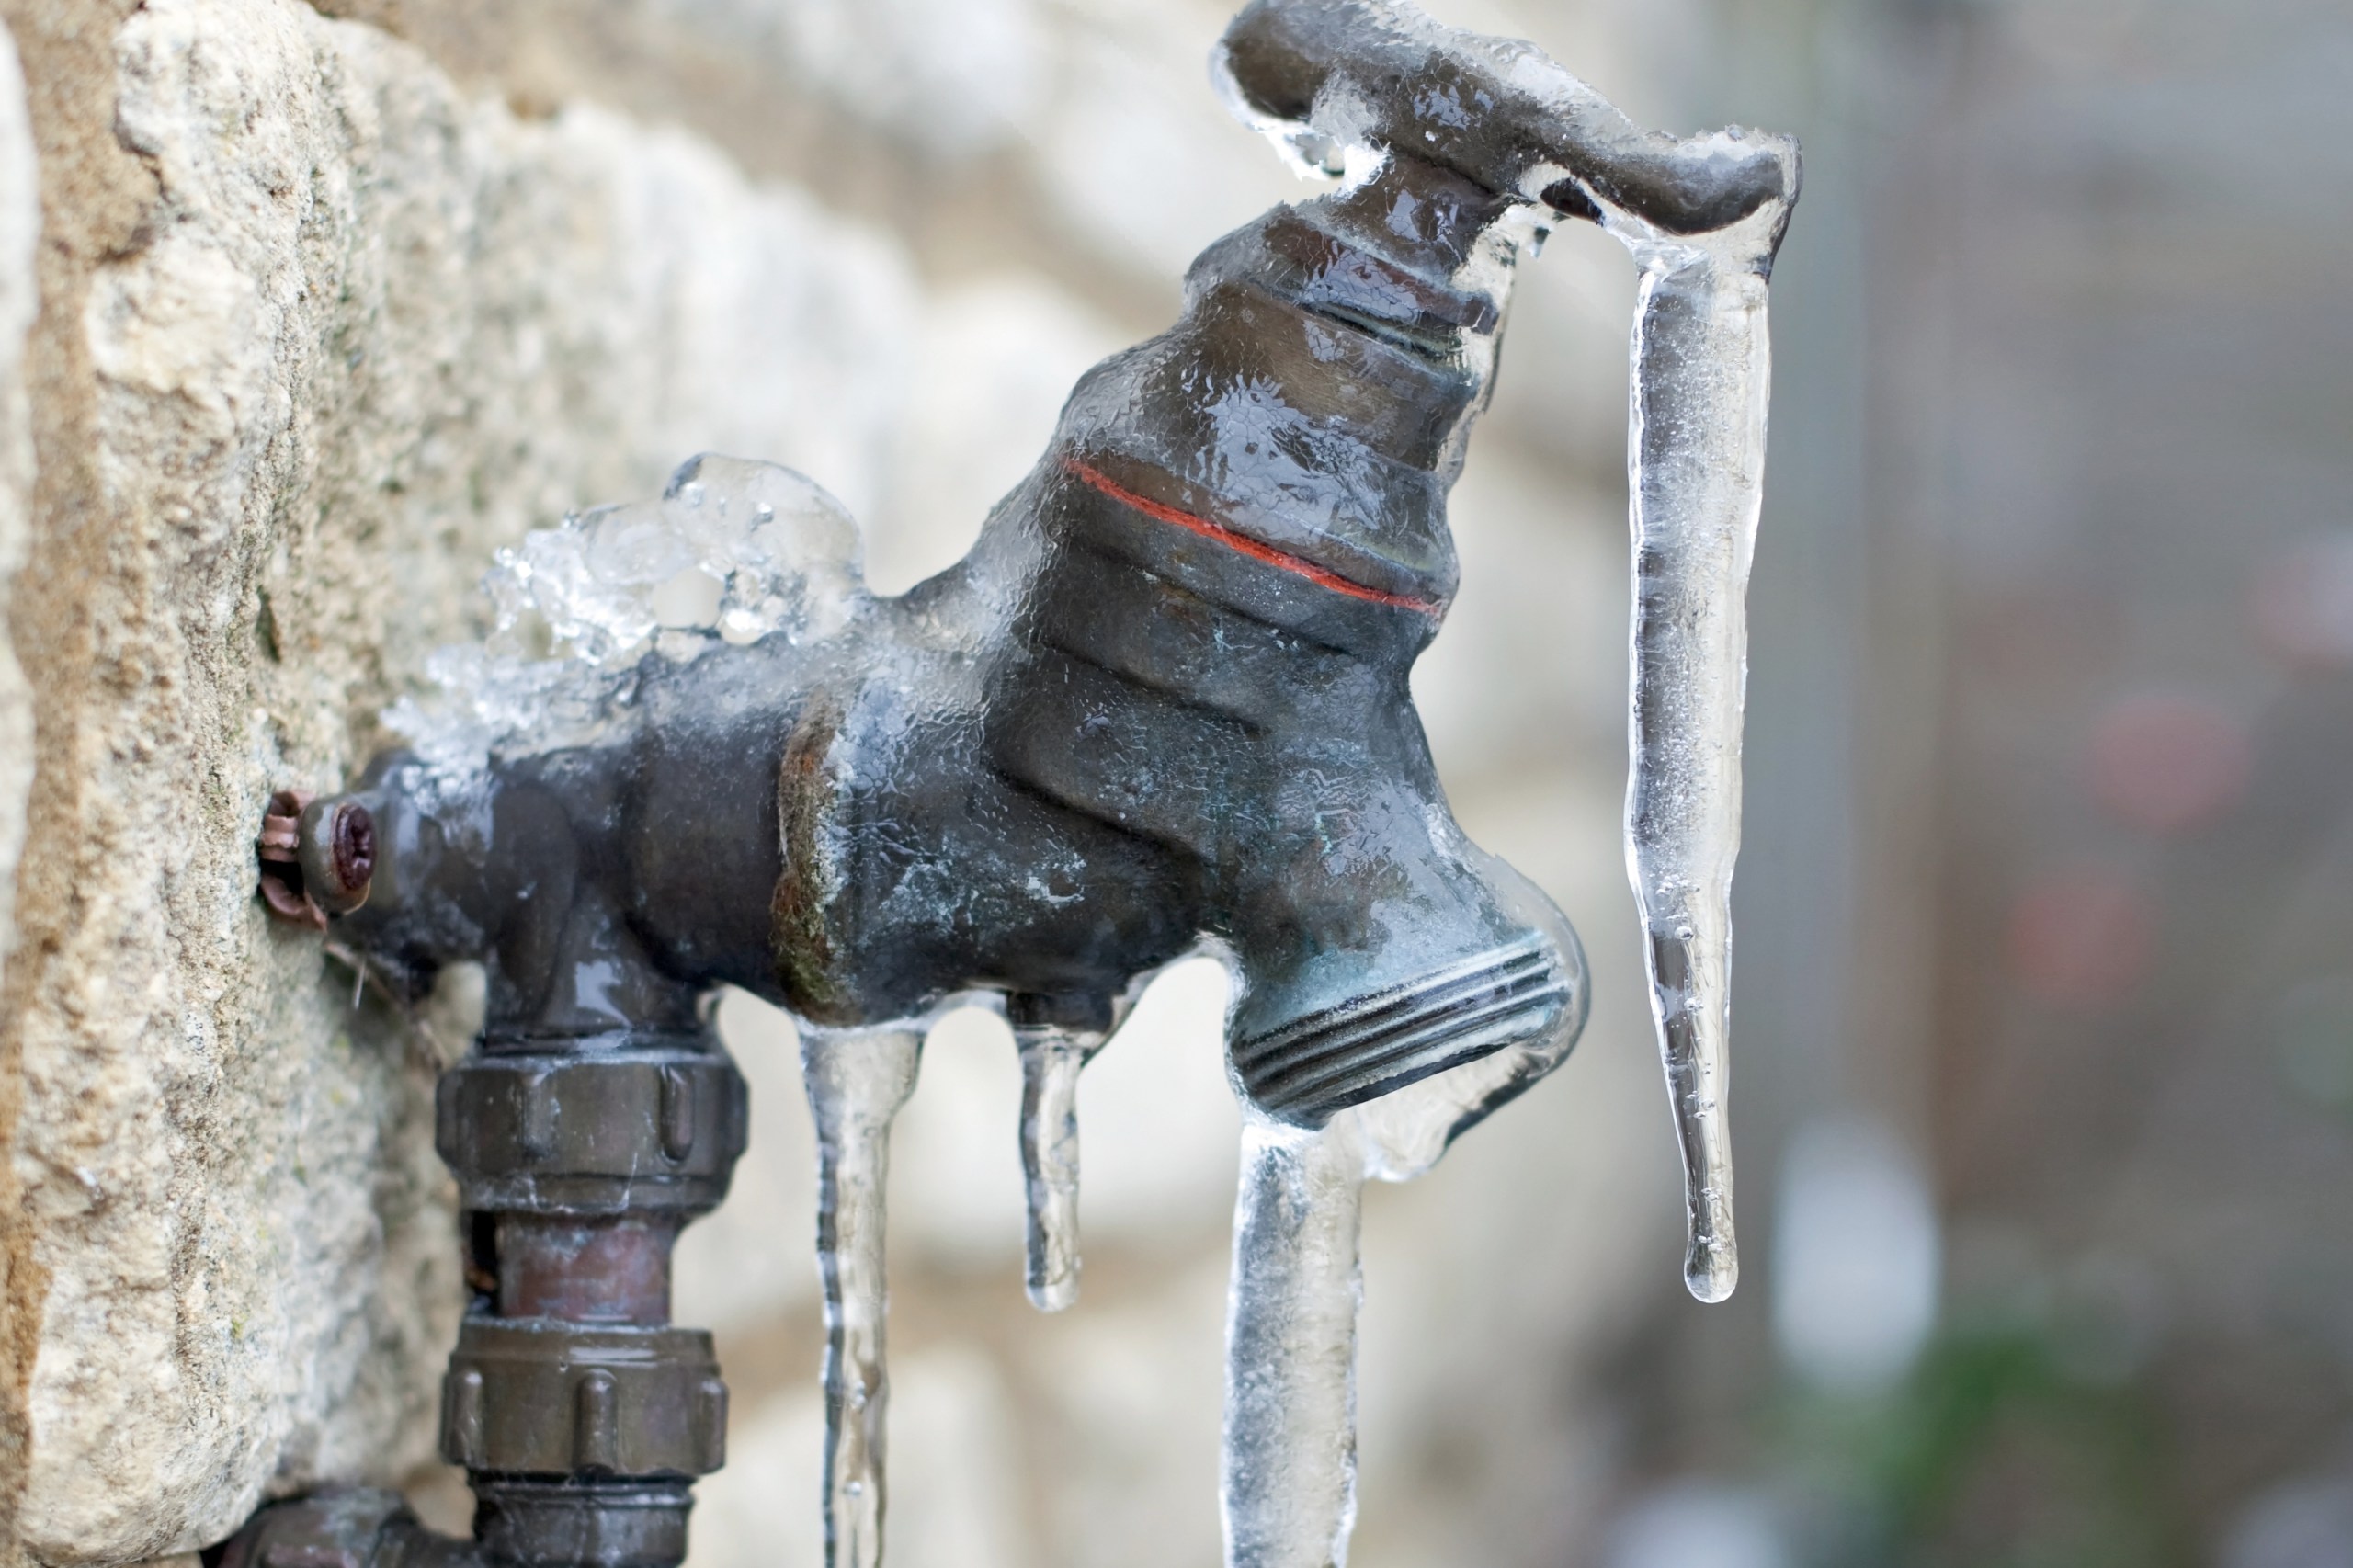 How To Keep Pipes From Freezing Stop Pipes From Freezing